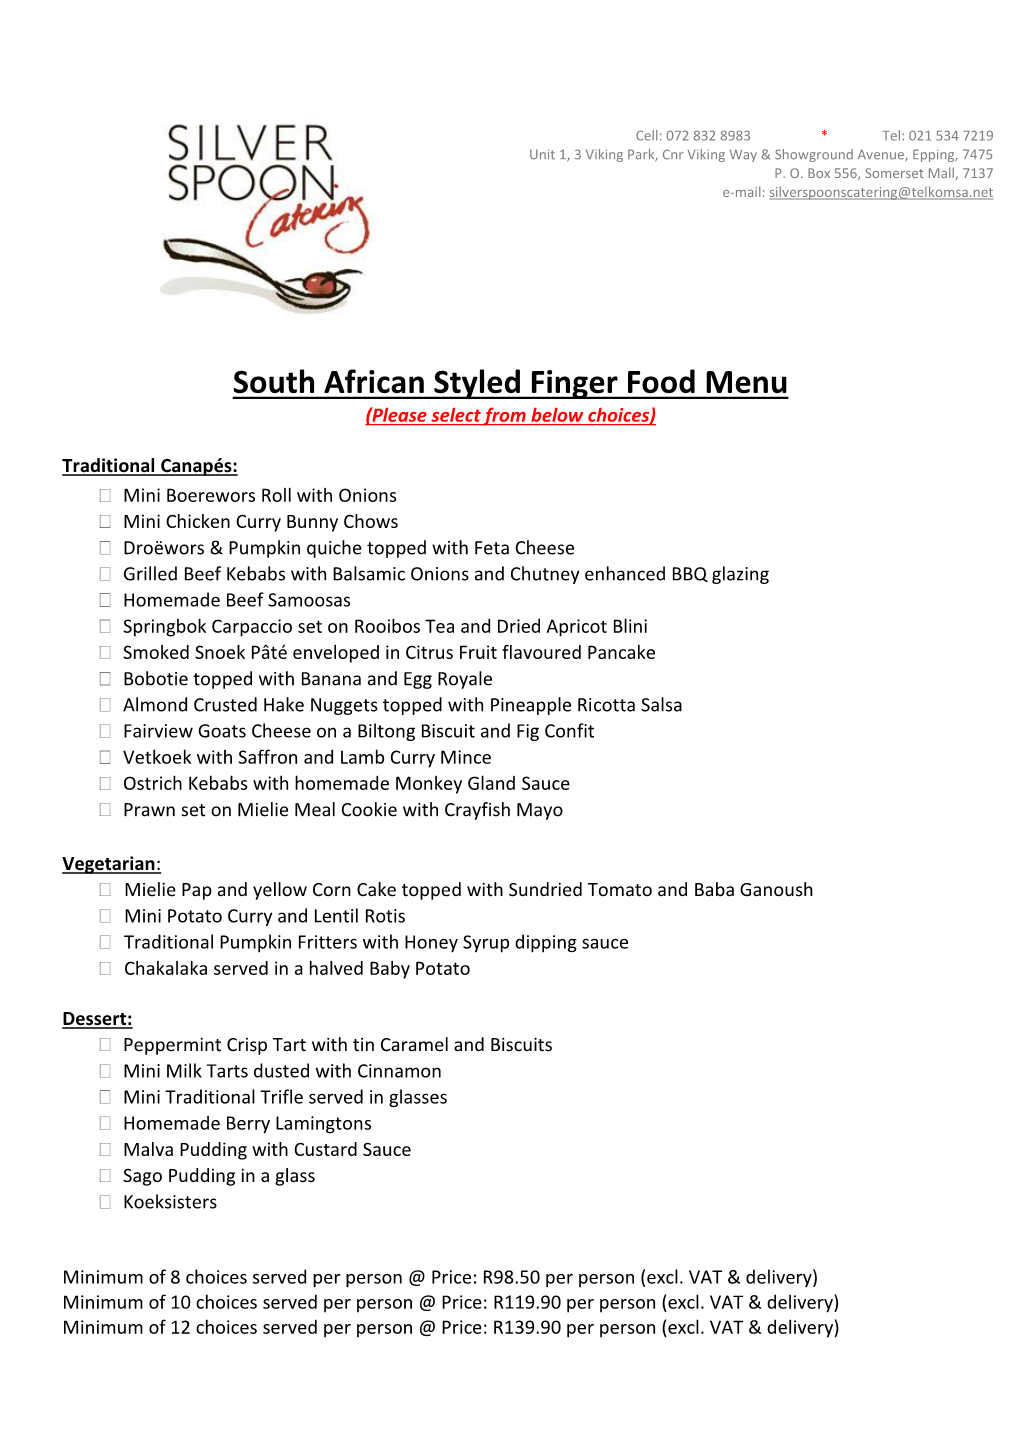 South African Styled Finger Food Menu (Please Select from Below Choices)